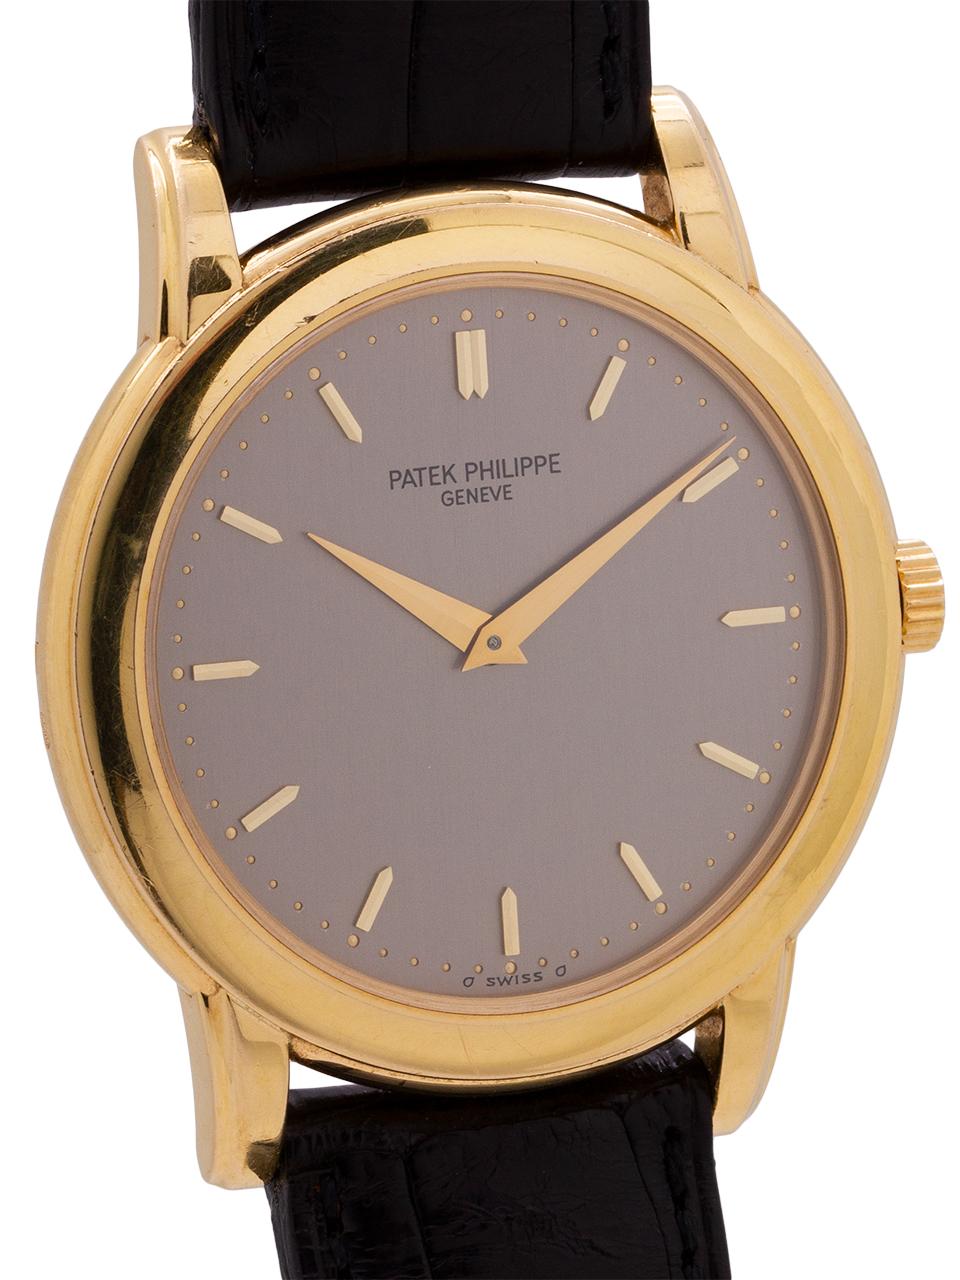 
Patek Philippe 18K yellow gold Calatrava ref 5032 circa 1990’s. Featuring a 36mm diameter case with smooth, stepped bezel and screwdown waterproof caseback. Dark silvered dial with applied gold indexes and gold dauphine hands. Powered by the famous